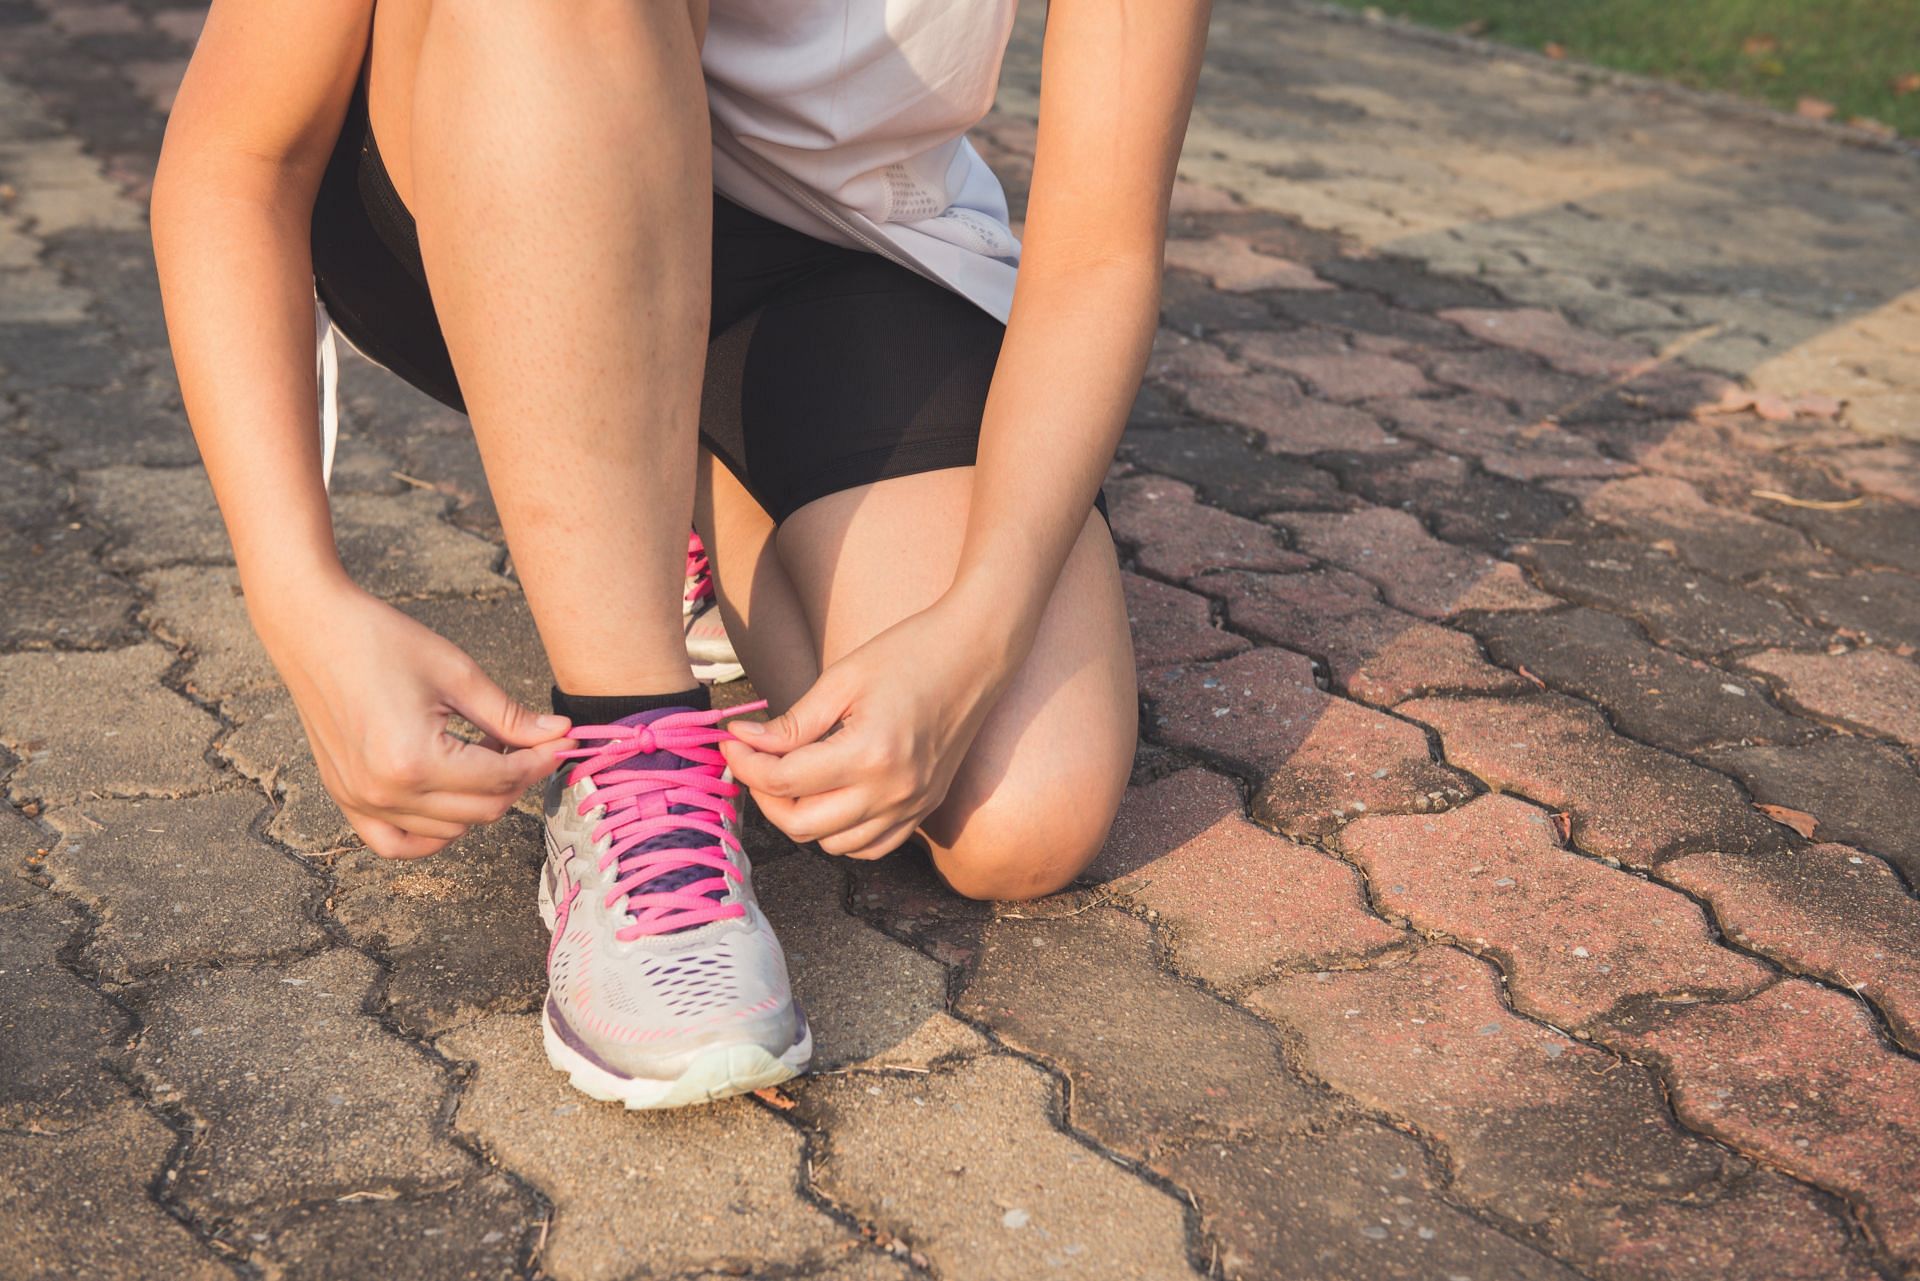 Tips for jogging for women (image sourced via Pexels / Photo by Tirachard)